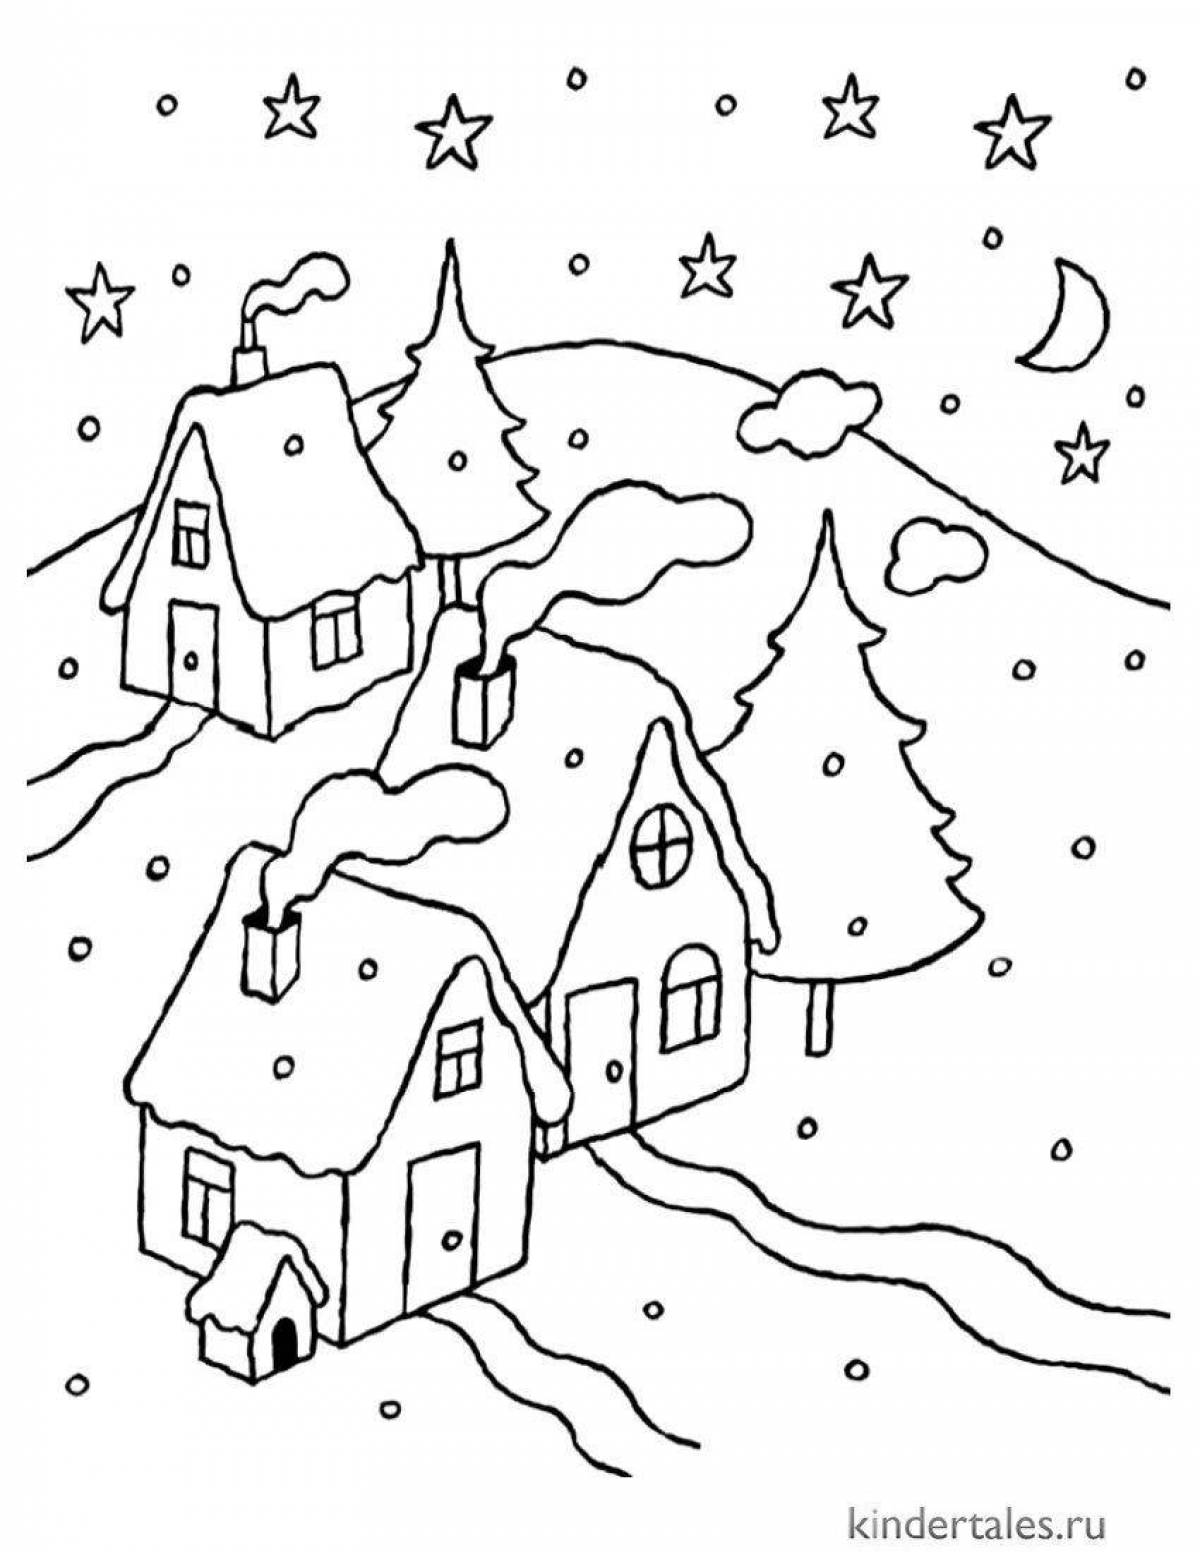 Great winter nature coloring book